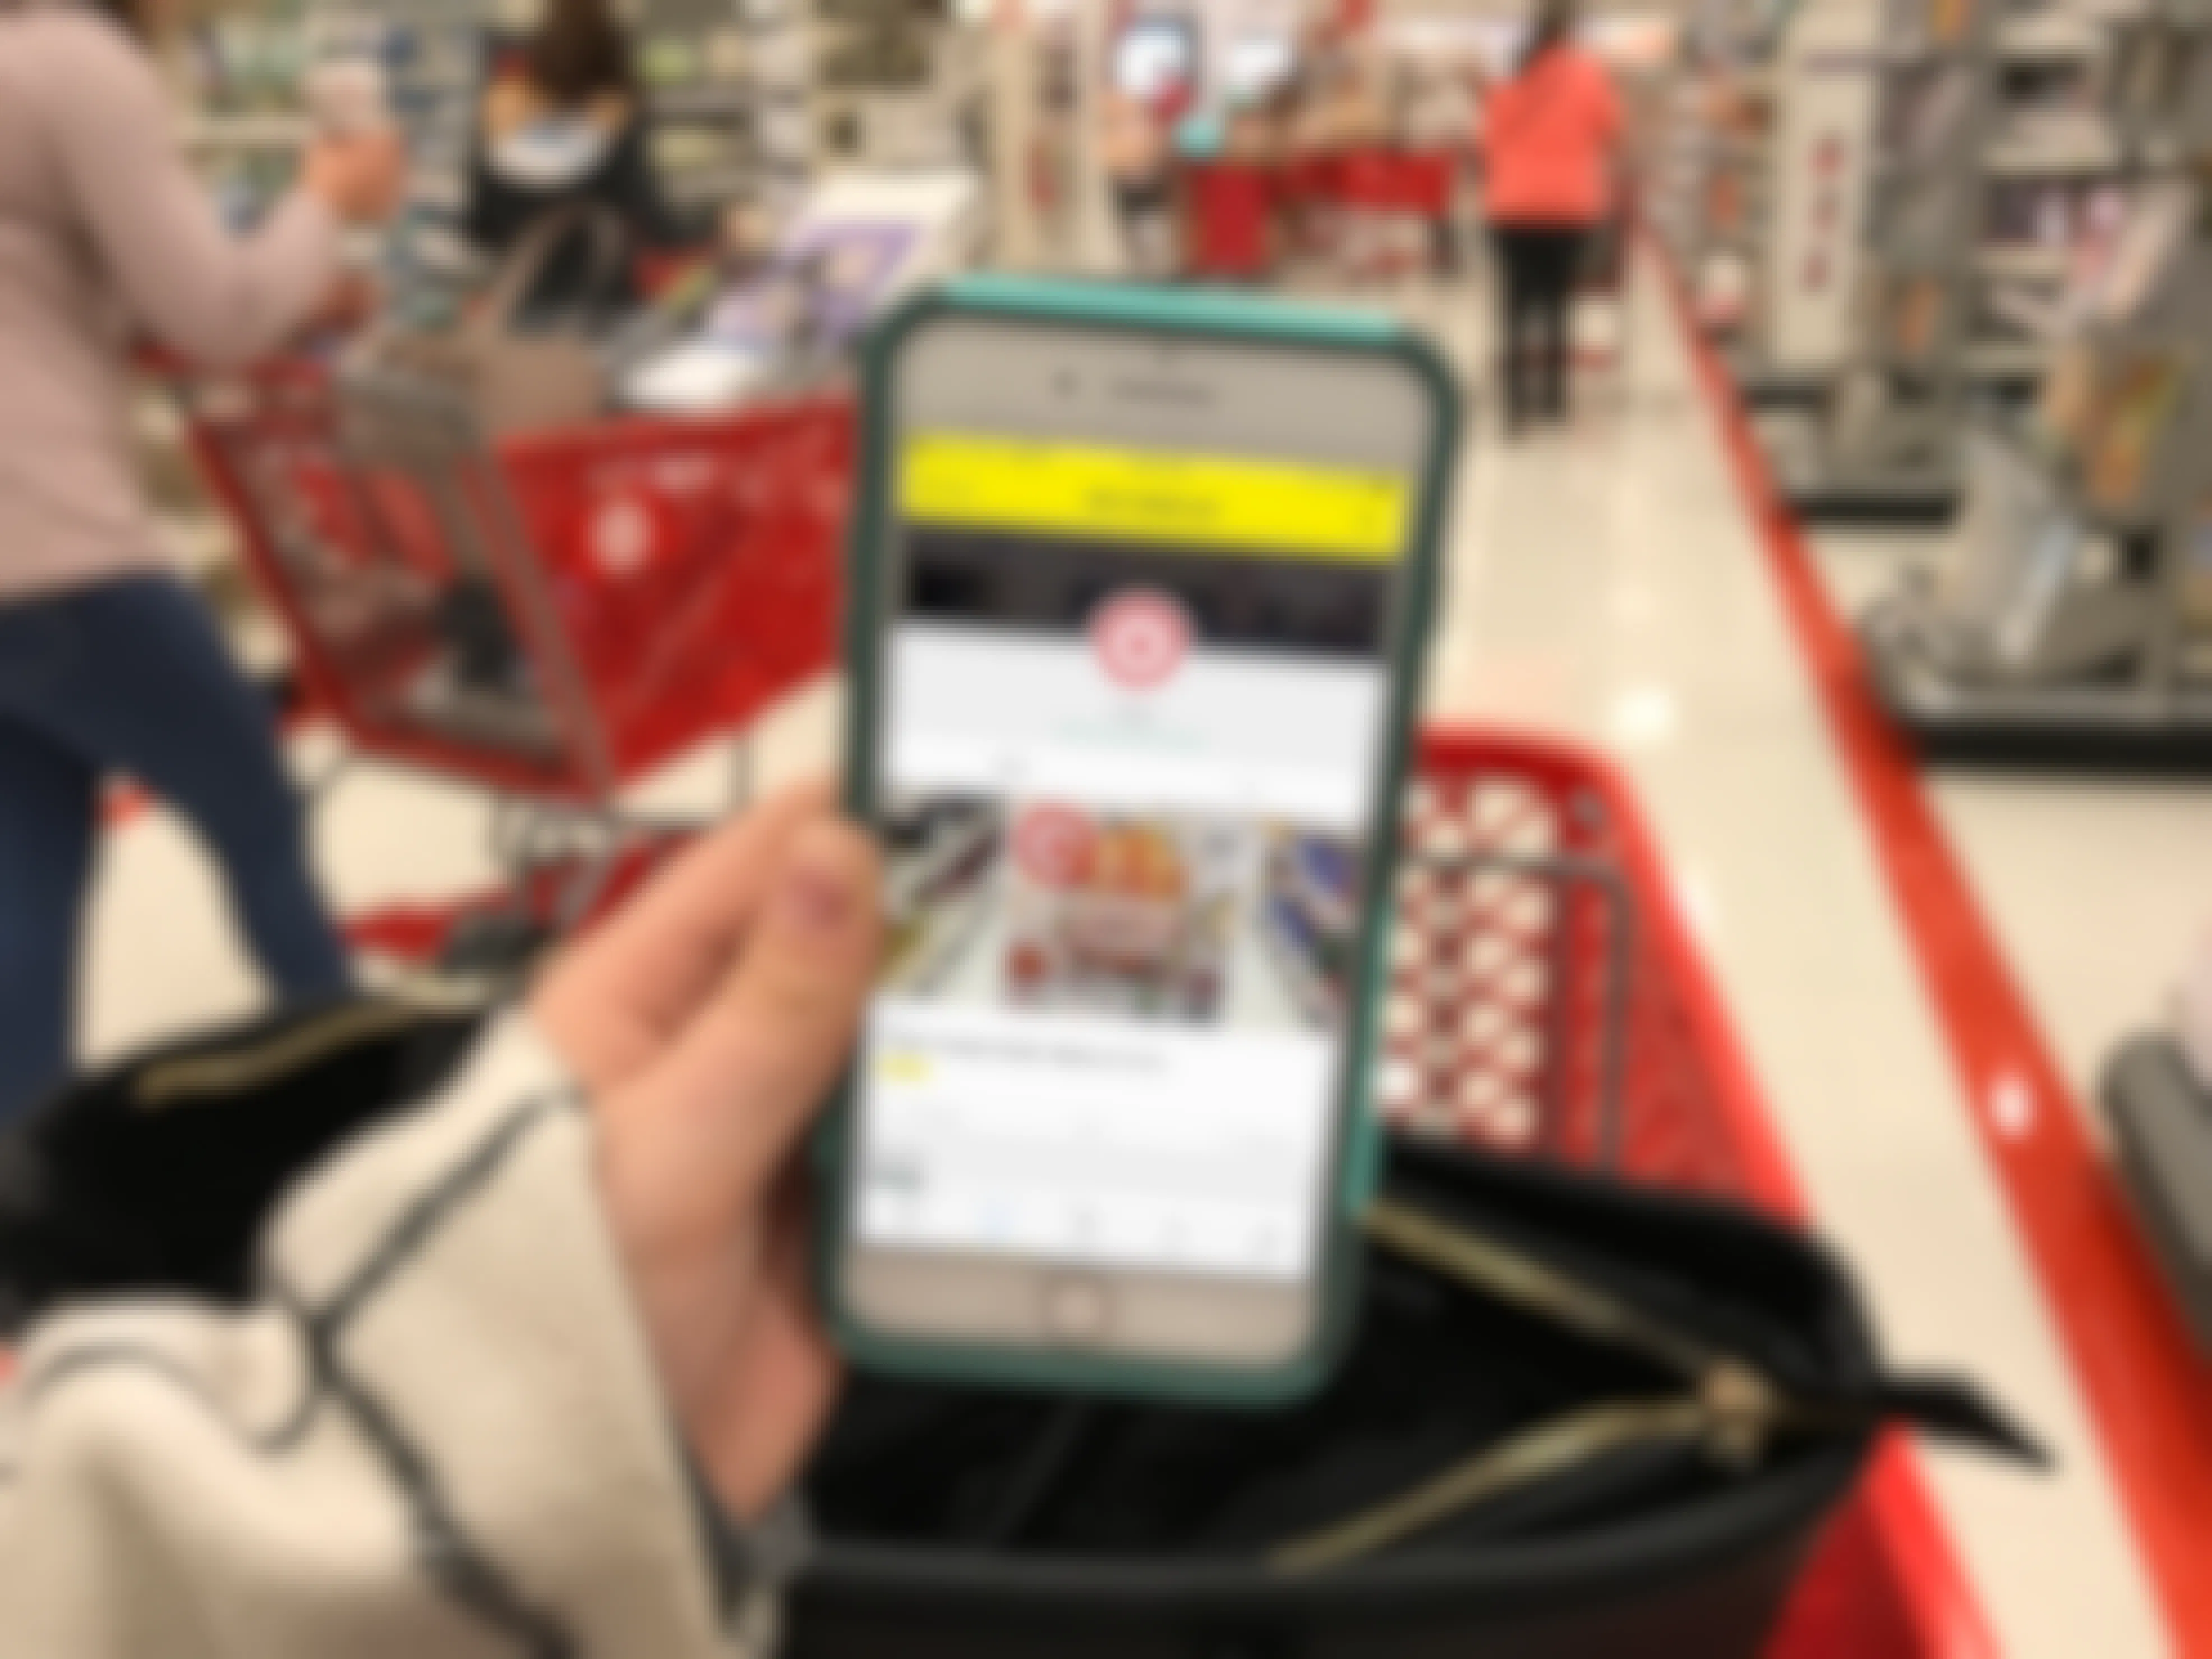 A person looking at their phone displaying the Target page of the KrazyCouponLady app.